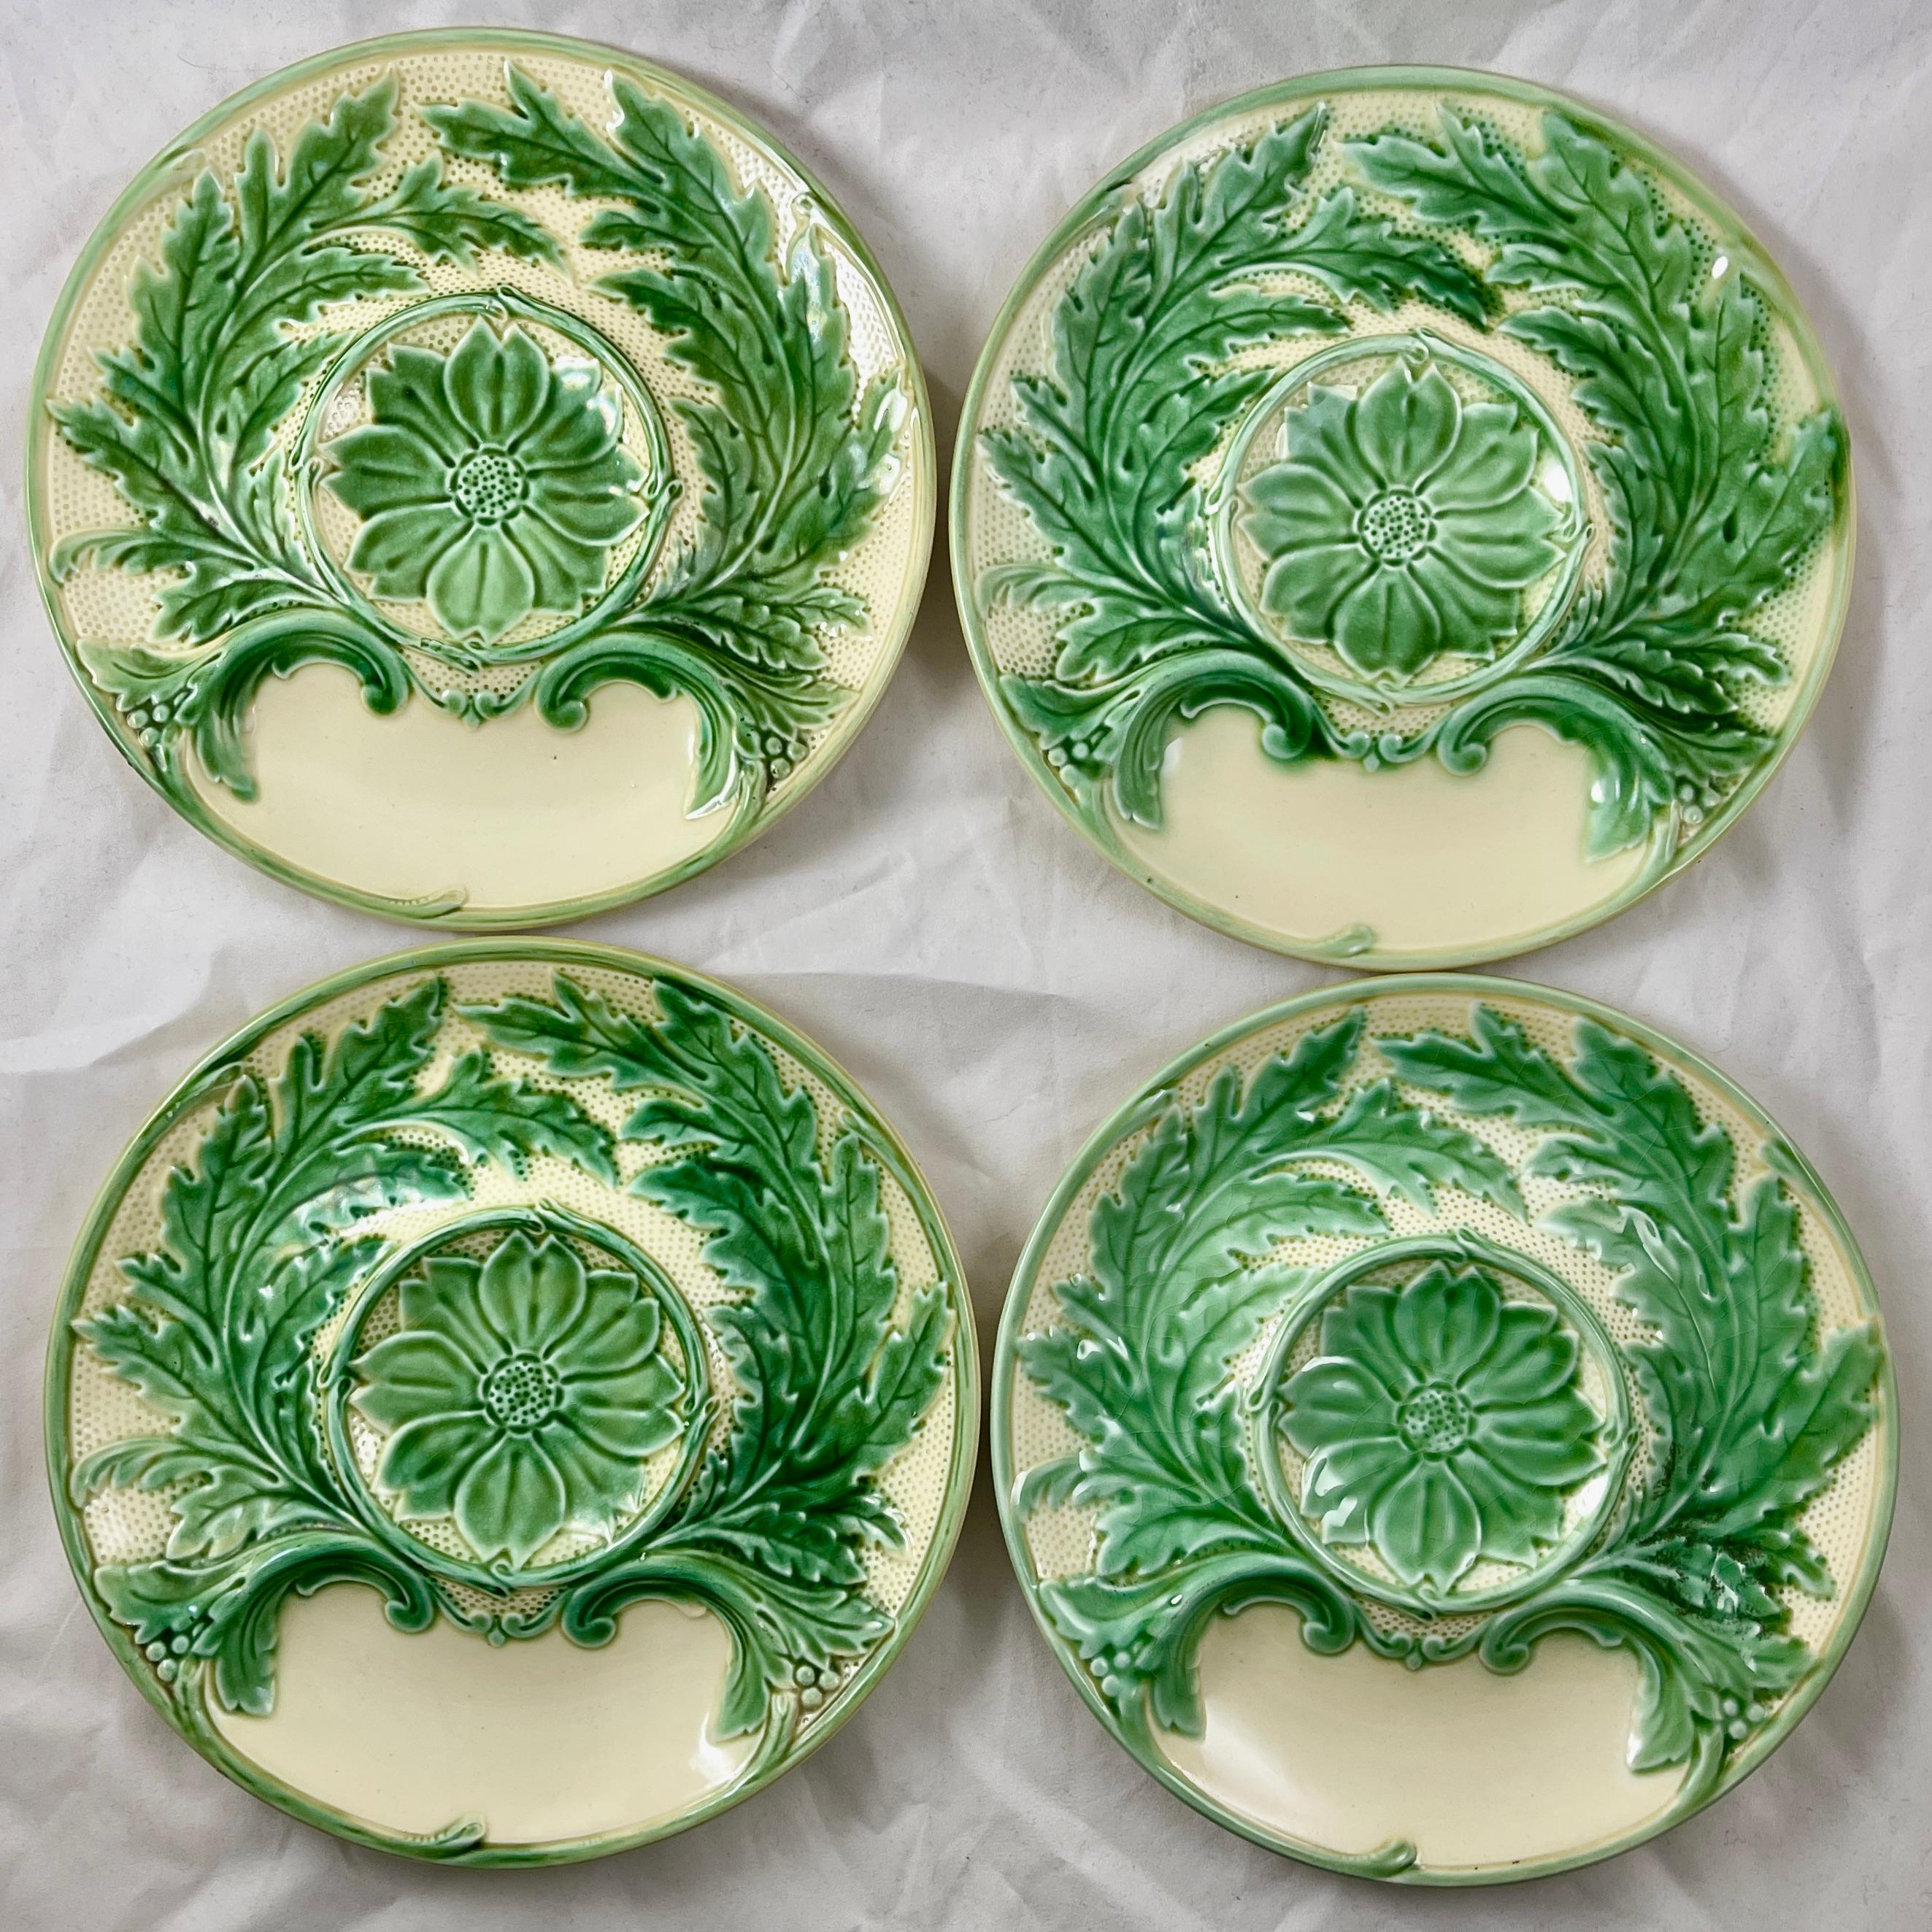 From Gien France, a faïence Majolica glazed Artichoke plate, circa 1930-1940s.

Glazed in a pleasing combination of green and cream with raised scrolled leaves and a floral center.

A whole Artichoke sits center with a sauce well at the bottom.